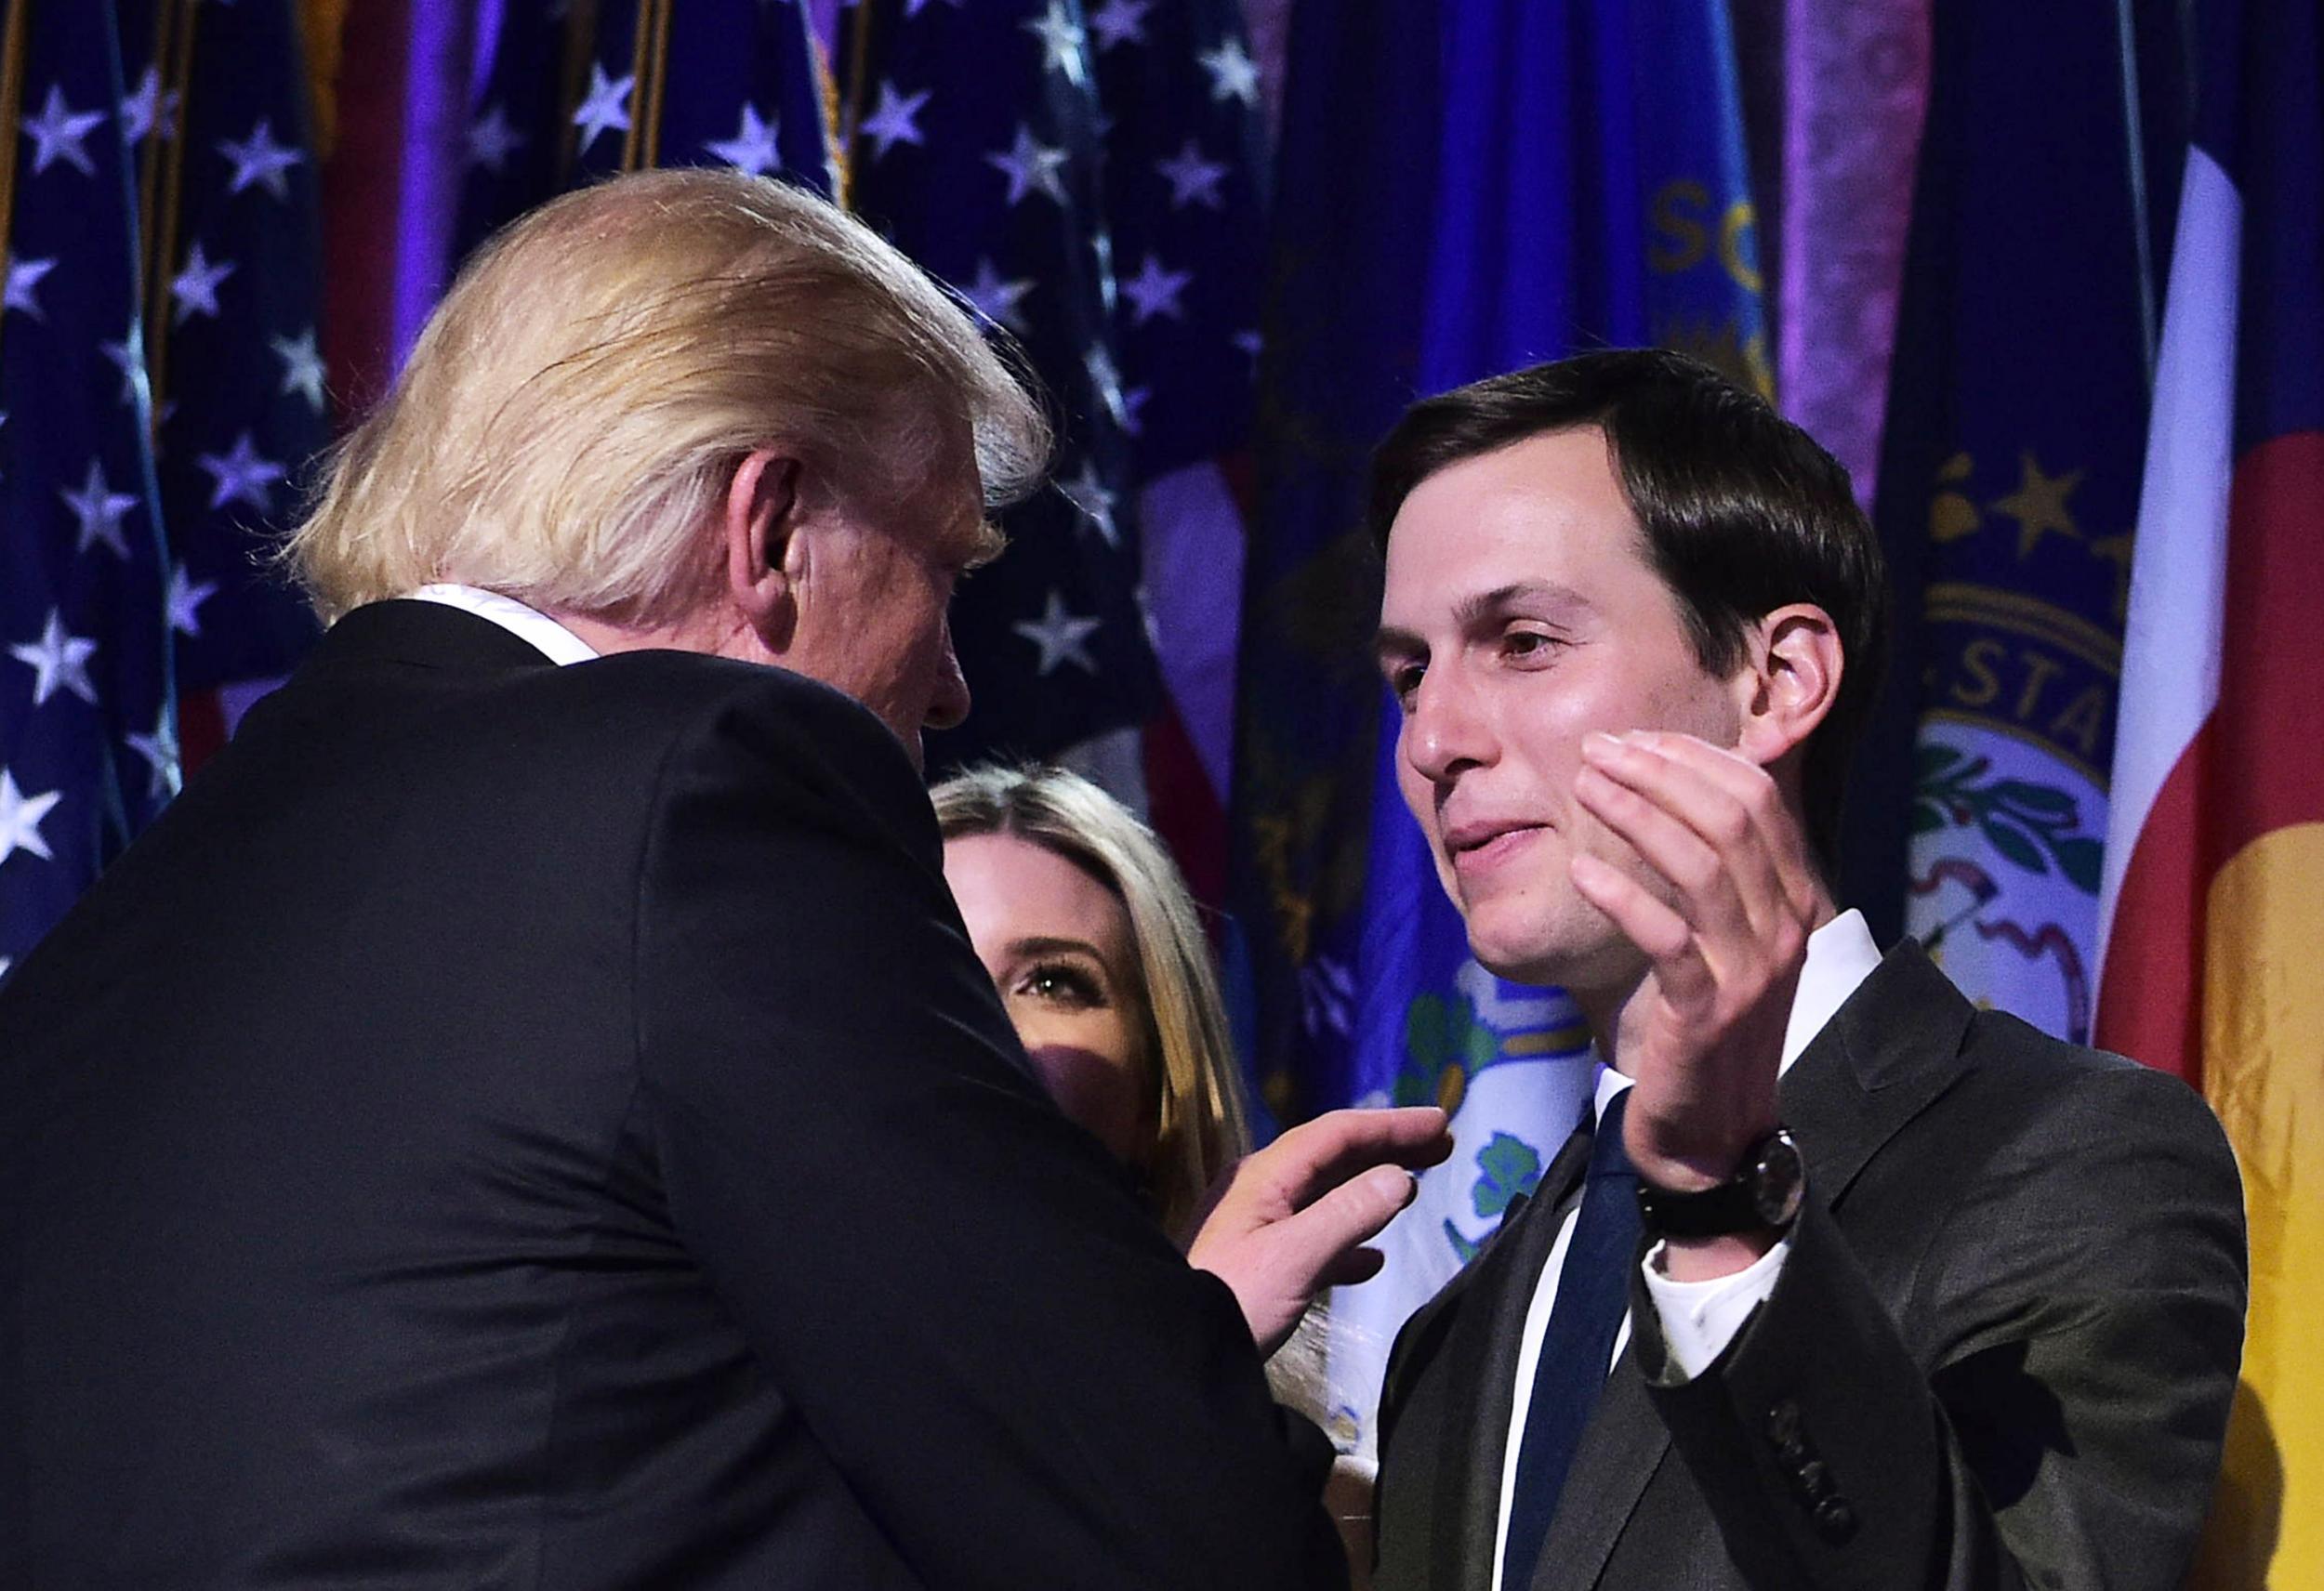 Jared Kushner congratulates his father-in-law in New York on election night